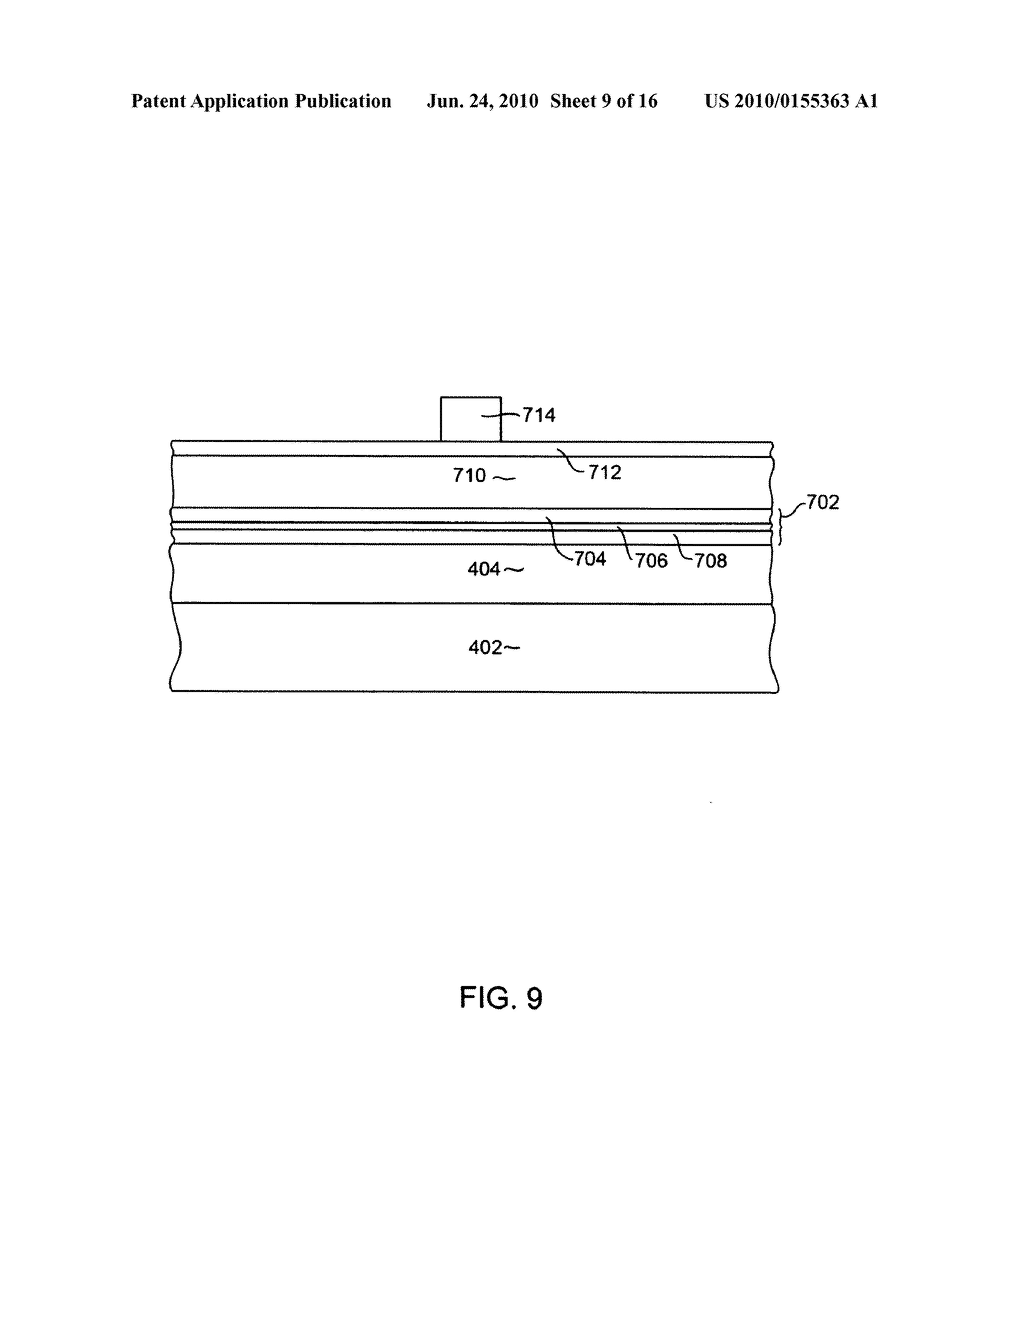 METHOD FOR MANUFACTURING A MAGNETIC WRITE HEAD HAVING A WRITE POLE WITH A TRAILING EDGE TAPER USING A RIEABLE HARD MASK - diagram, schematic, and image 10